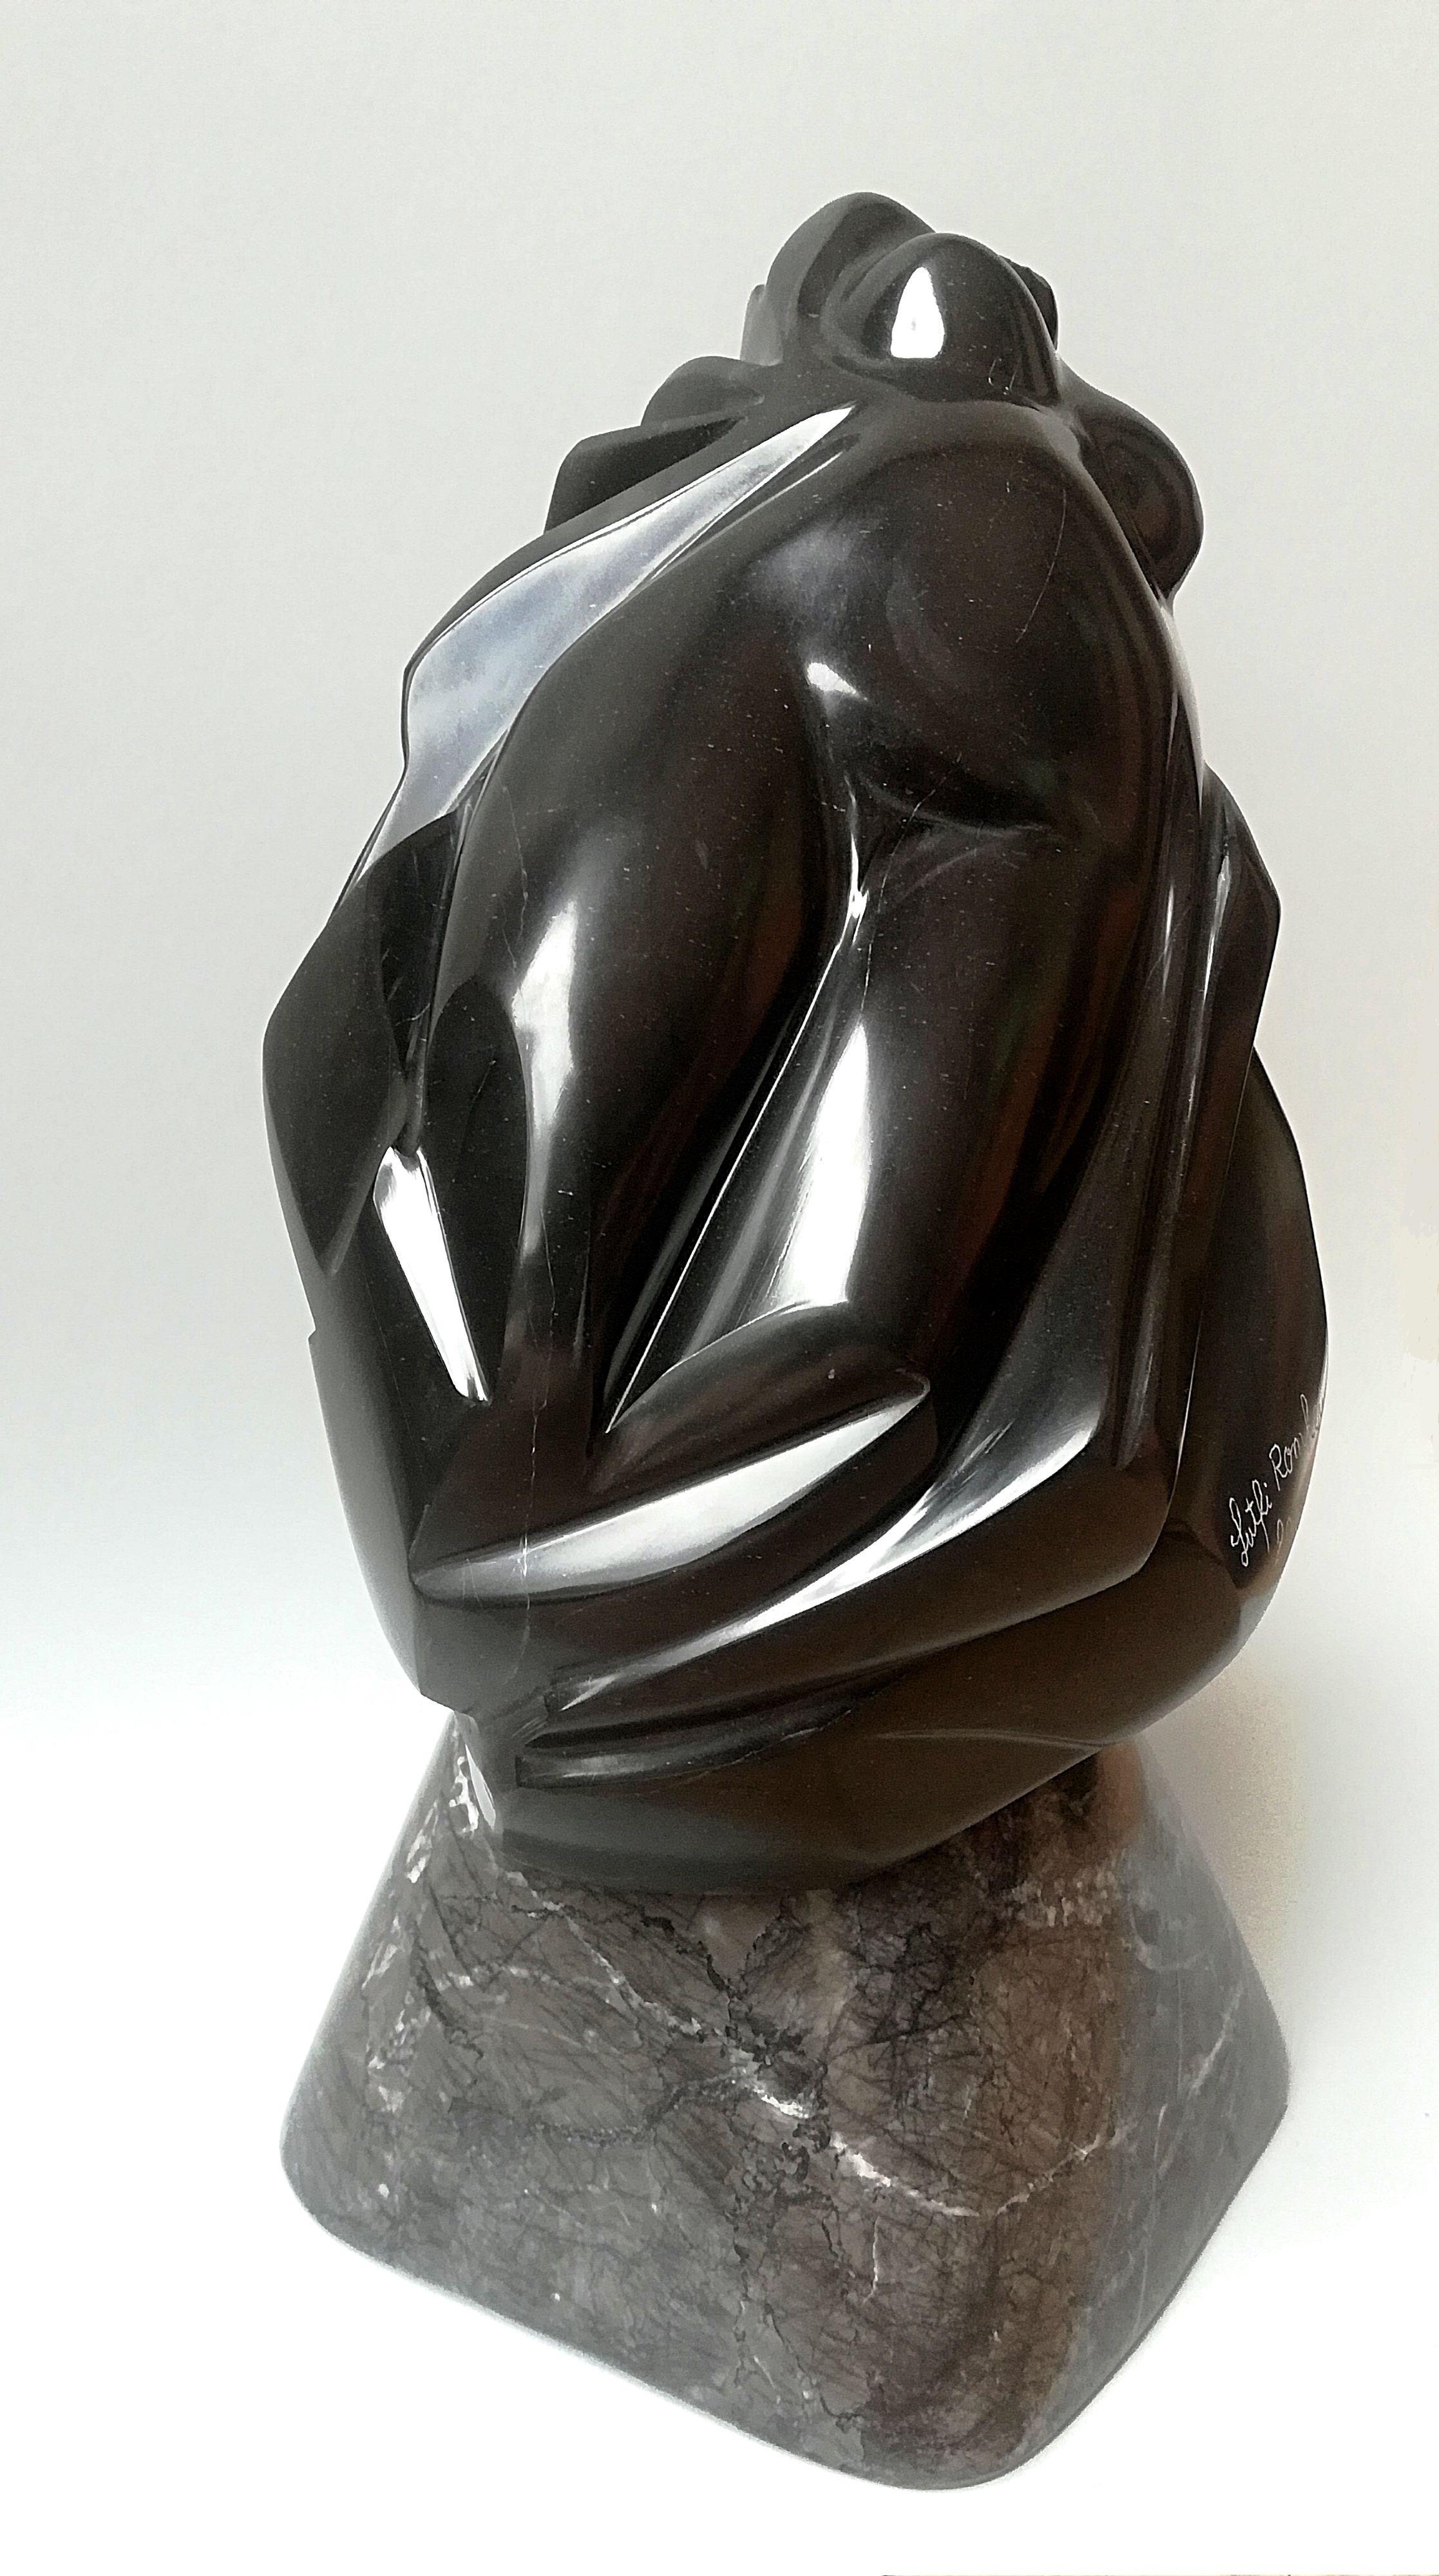 This figurative sculpture by Lutfi Romhein depicts a female nude bust in Belgian black marble mounted on a grey marble base. It has a very fine grain which provides a really soft touch. The mirror polished Belgian black marble is simply splendid